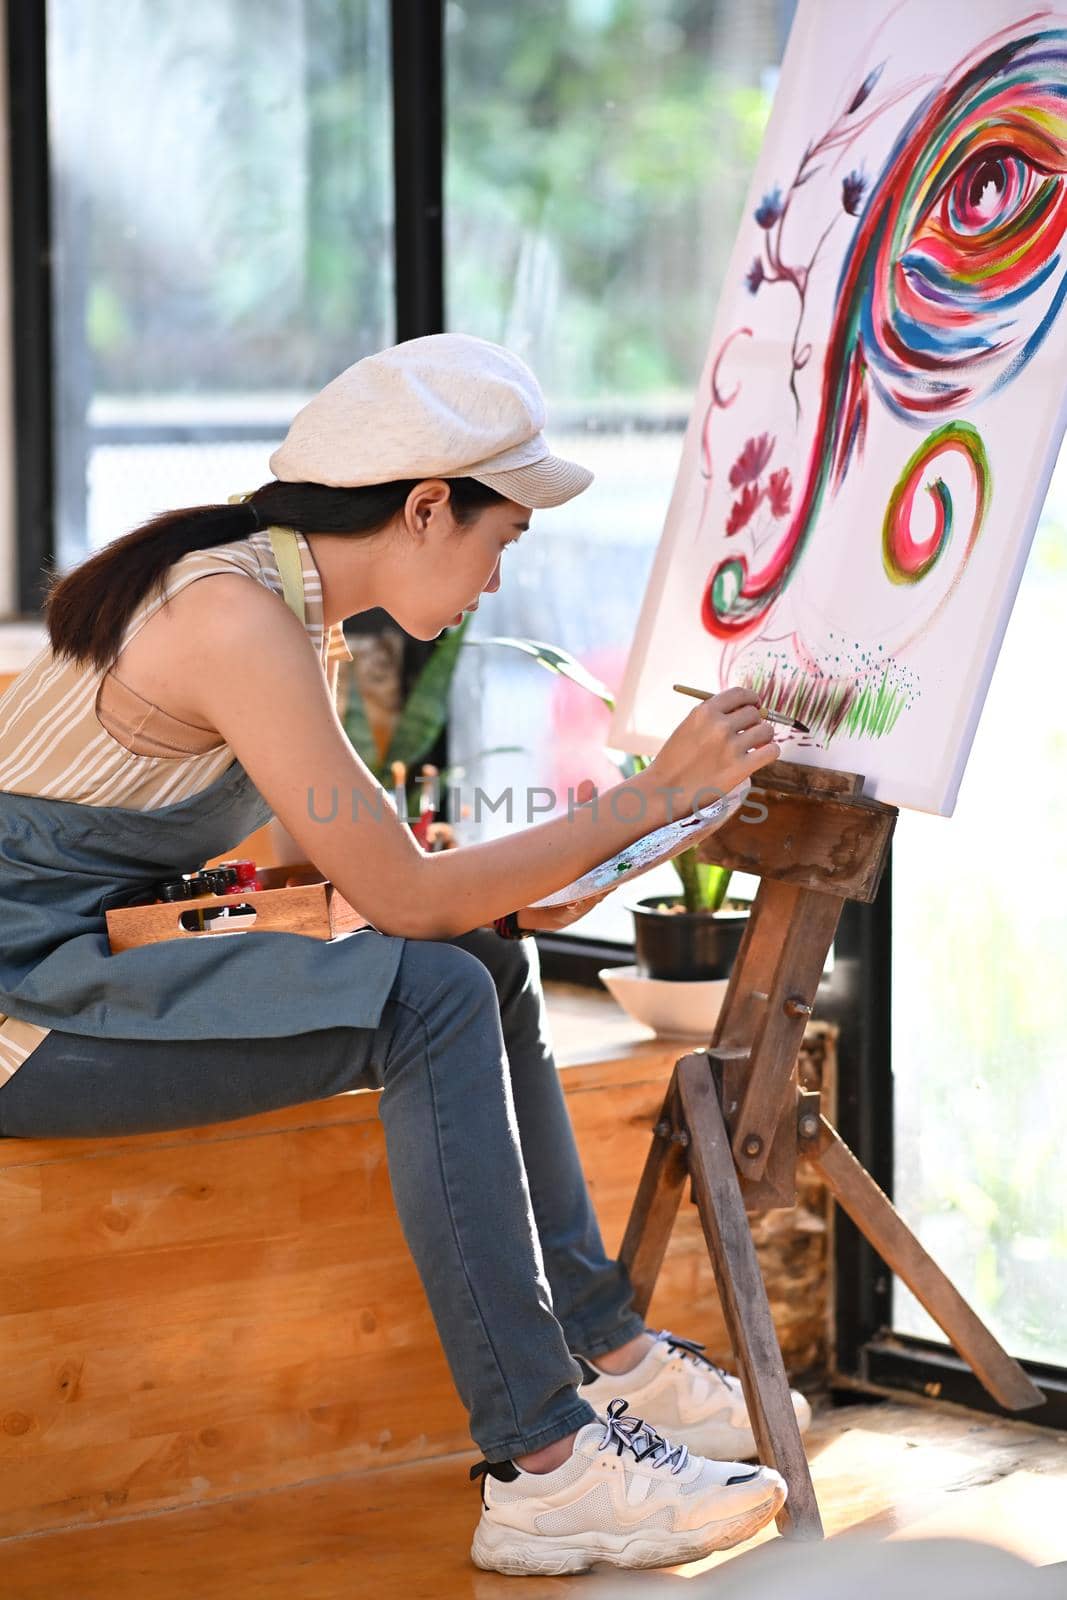 Female artist painting picture on easel in bright studio.